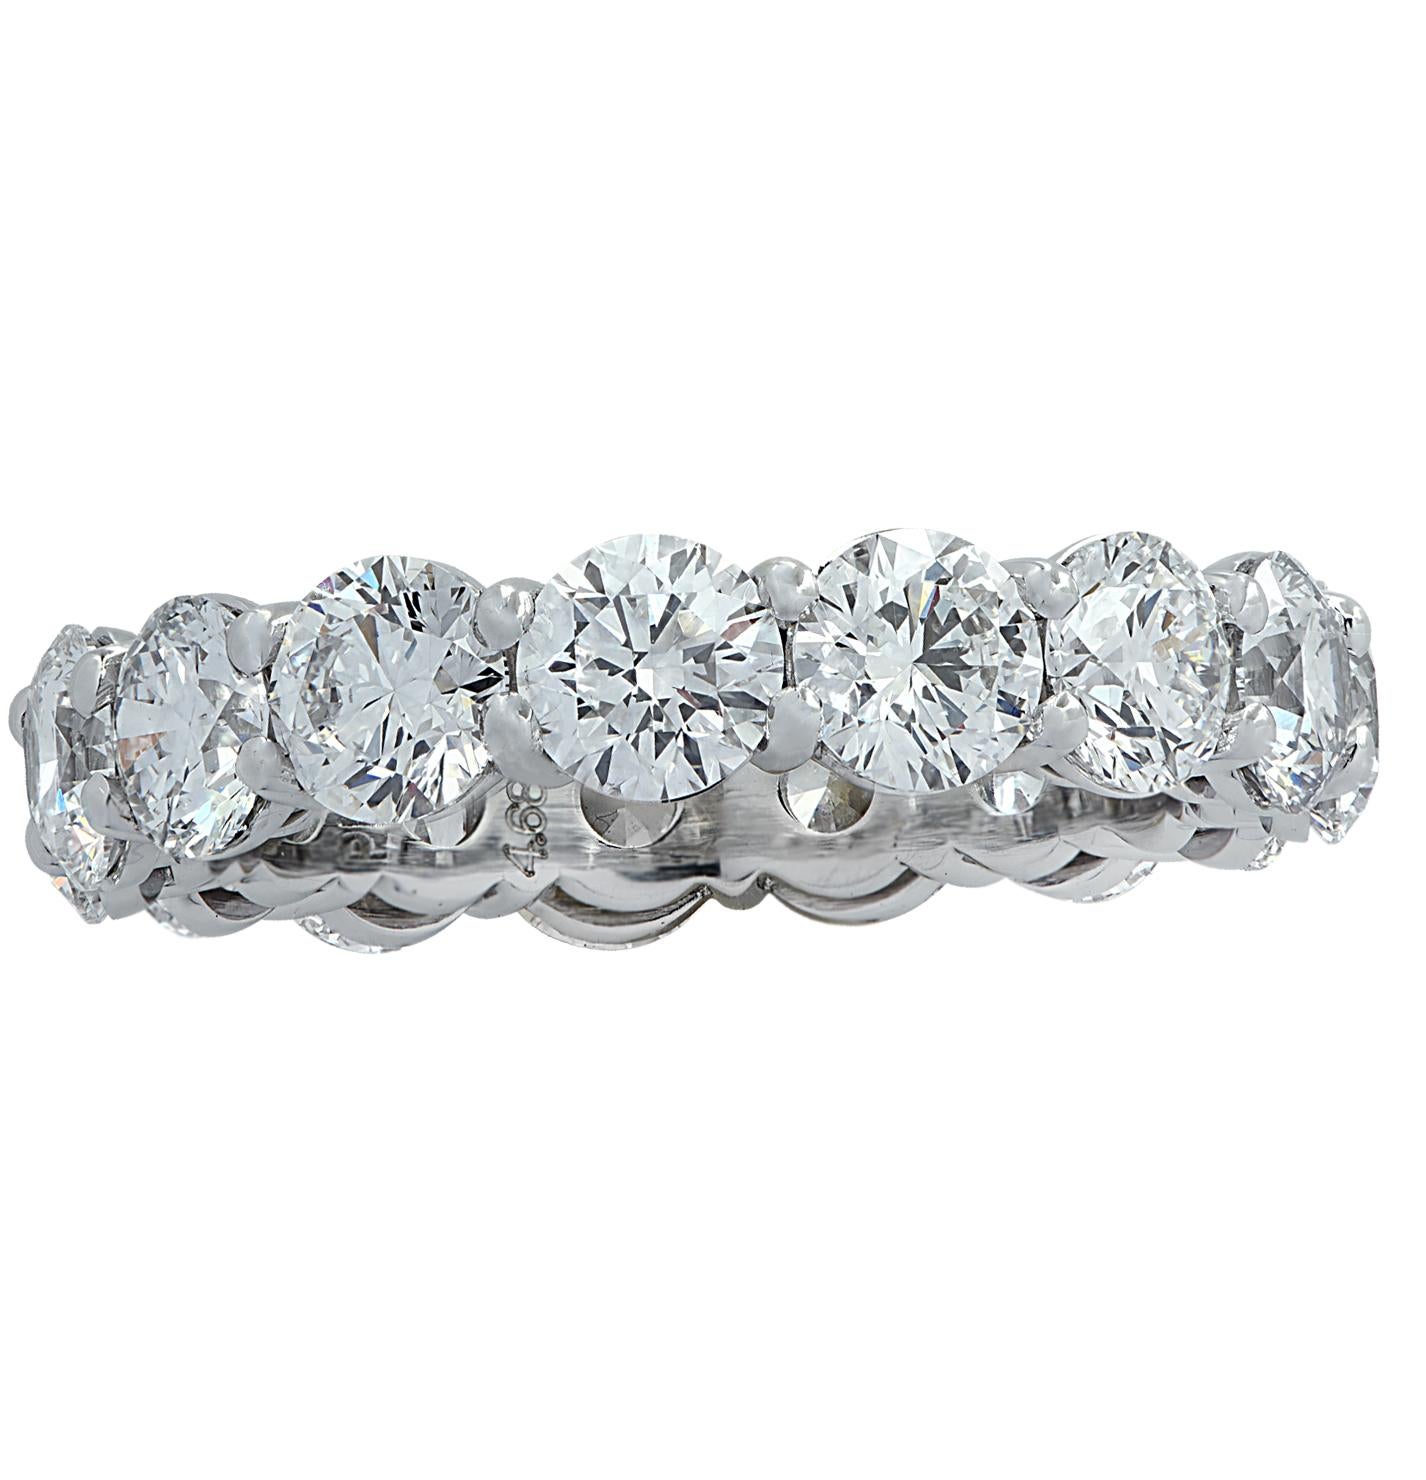 Exquisite eternity band crafted in Platinum, showcasing 15 stunning GIA certified round brilliant cut diamonds weighing 4.68 carats total, D color, VS-SI clarity. Each diamond was carefully selected, perfectly matched and set in a seamless sea of